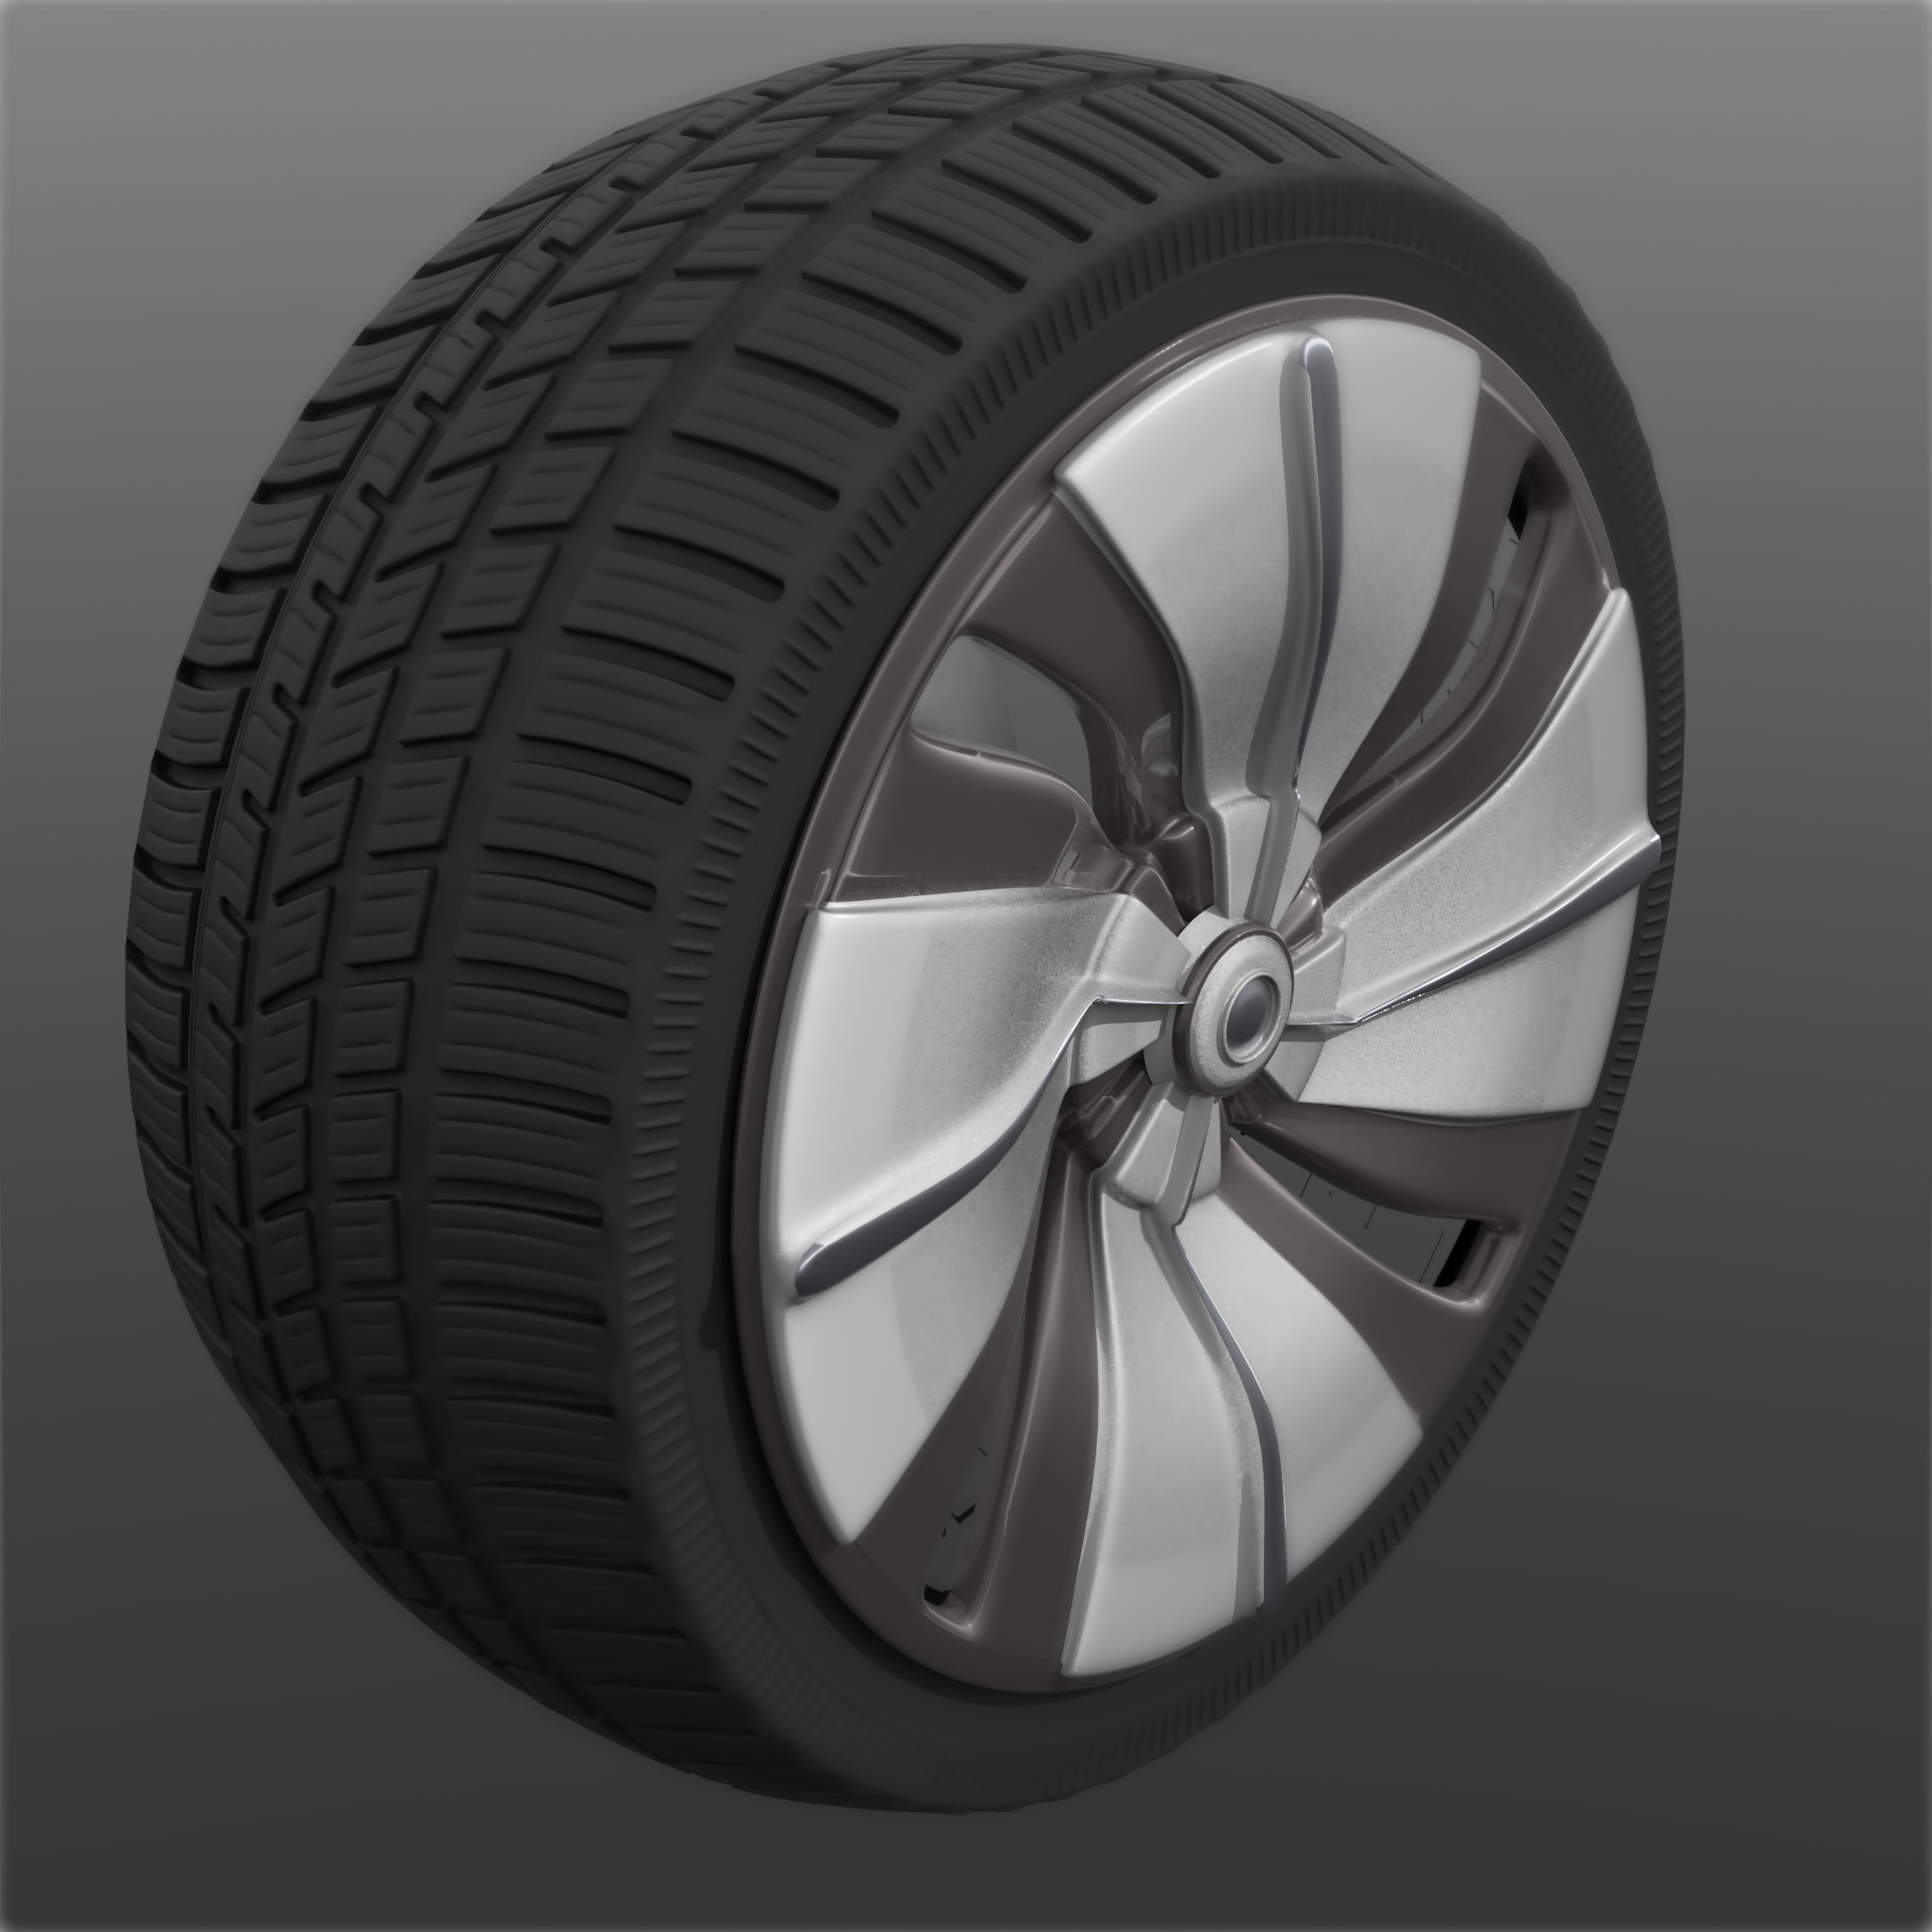 This is a wheel-and-tyre I modelled in Modo using a procedural setup (With some significant assistance from an exemplar by Eugene Fil (https://www.artstation.com/eugenethemodeler) - cheers mate!)